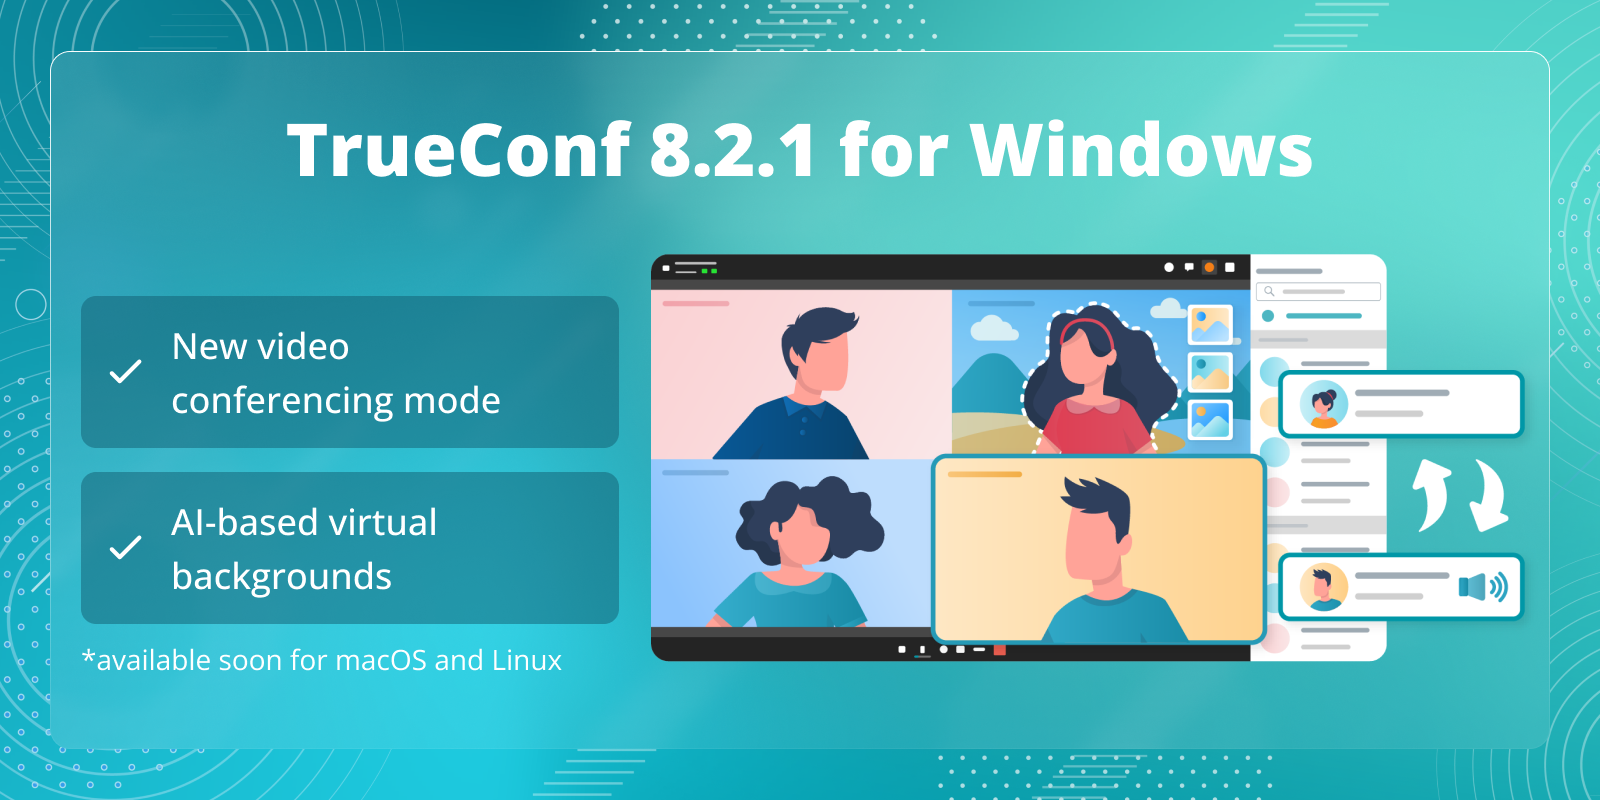 TrueConf 8.2.1 for Windows: new video conferencing mode and AI-based virtual backgrounds 1